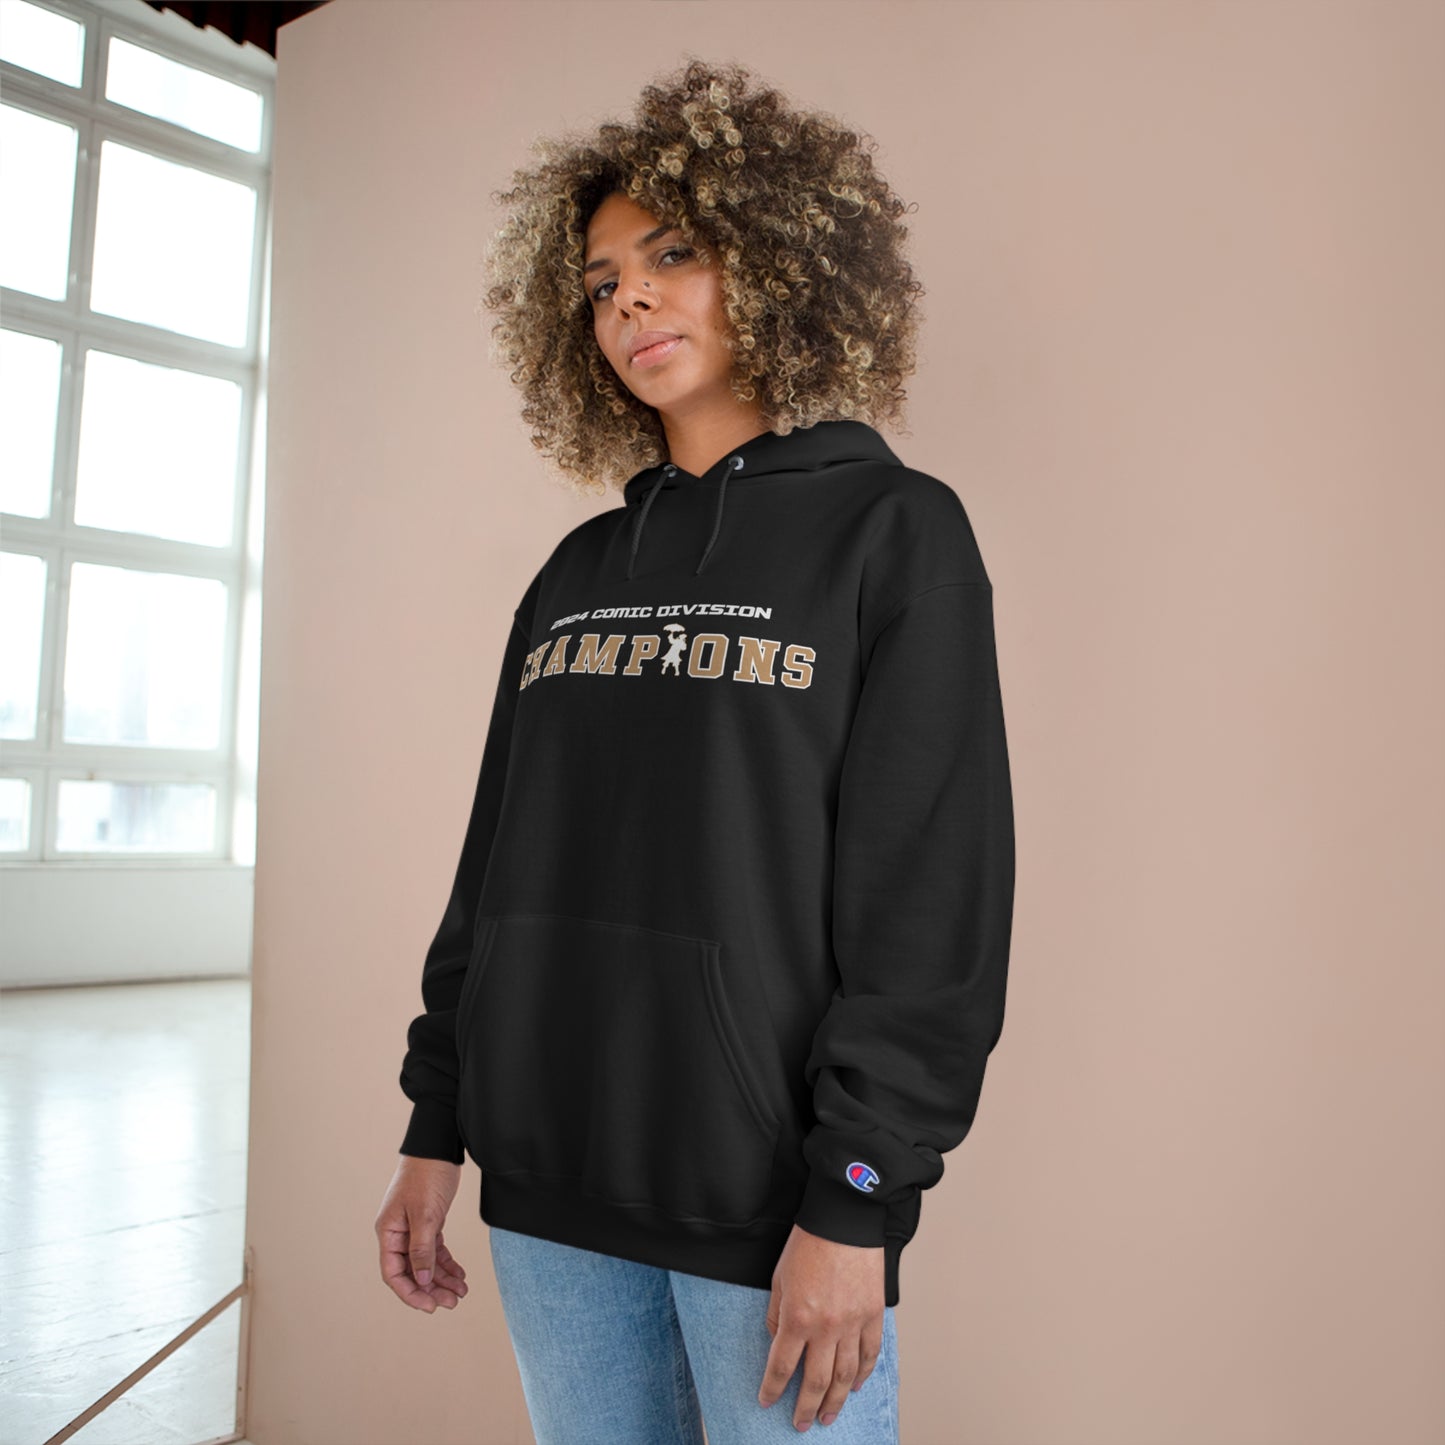 Two Street Stompers 2024 Championship Hoodie